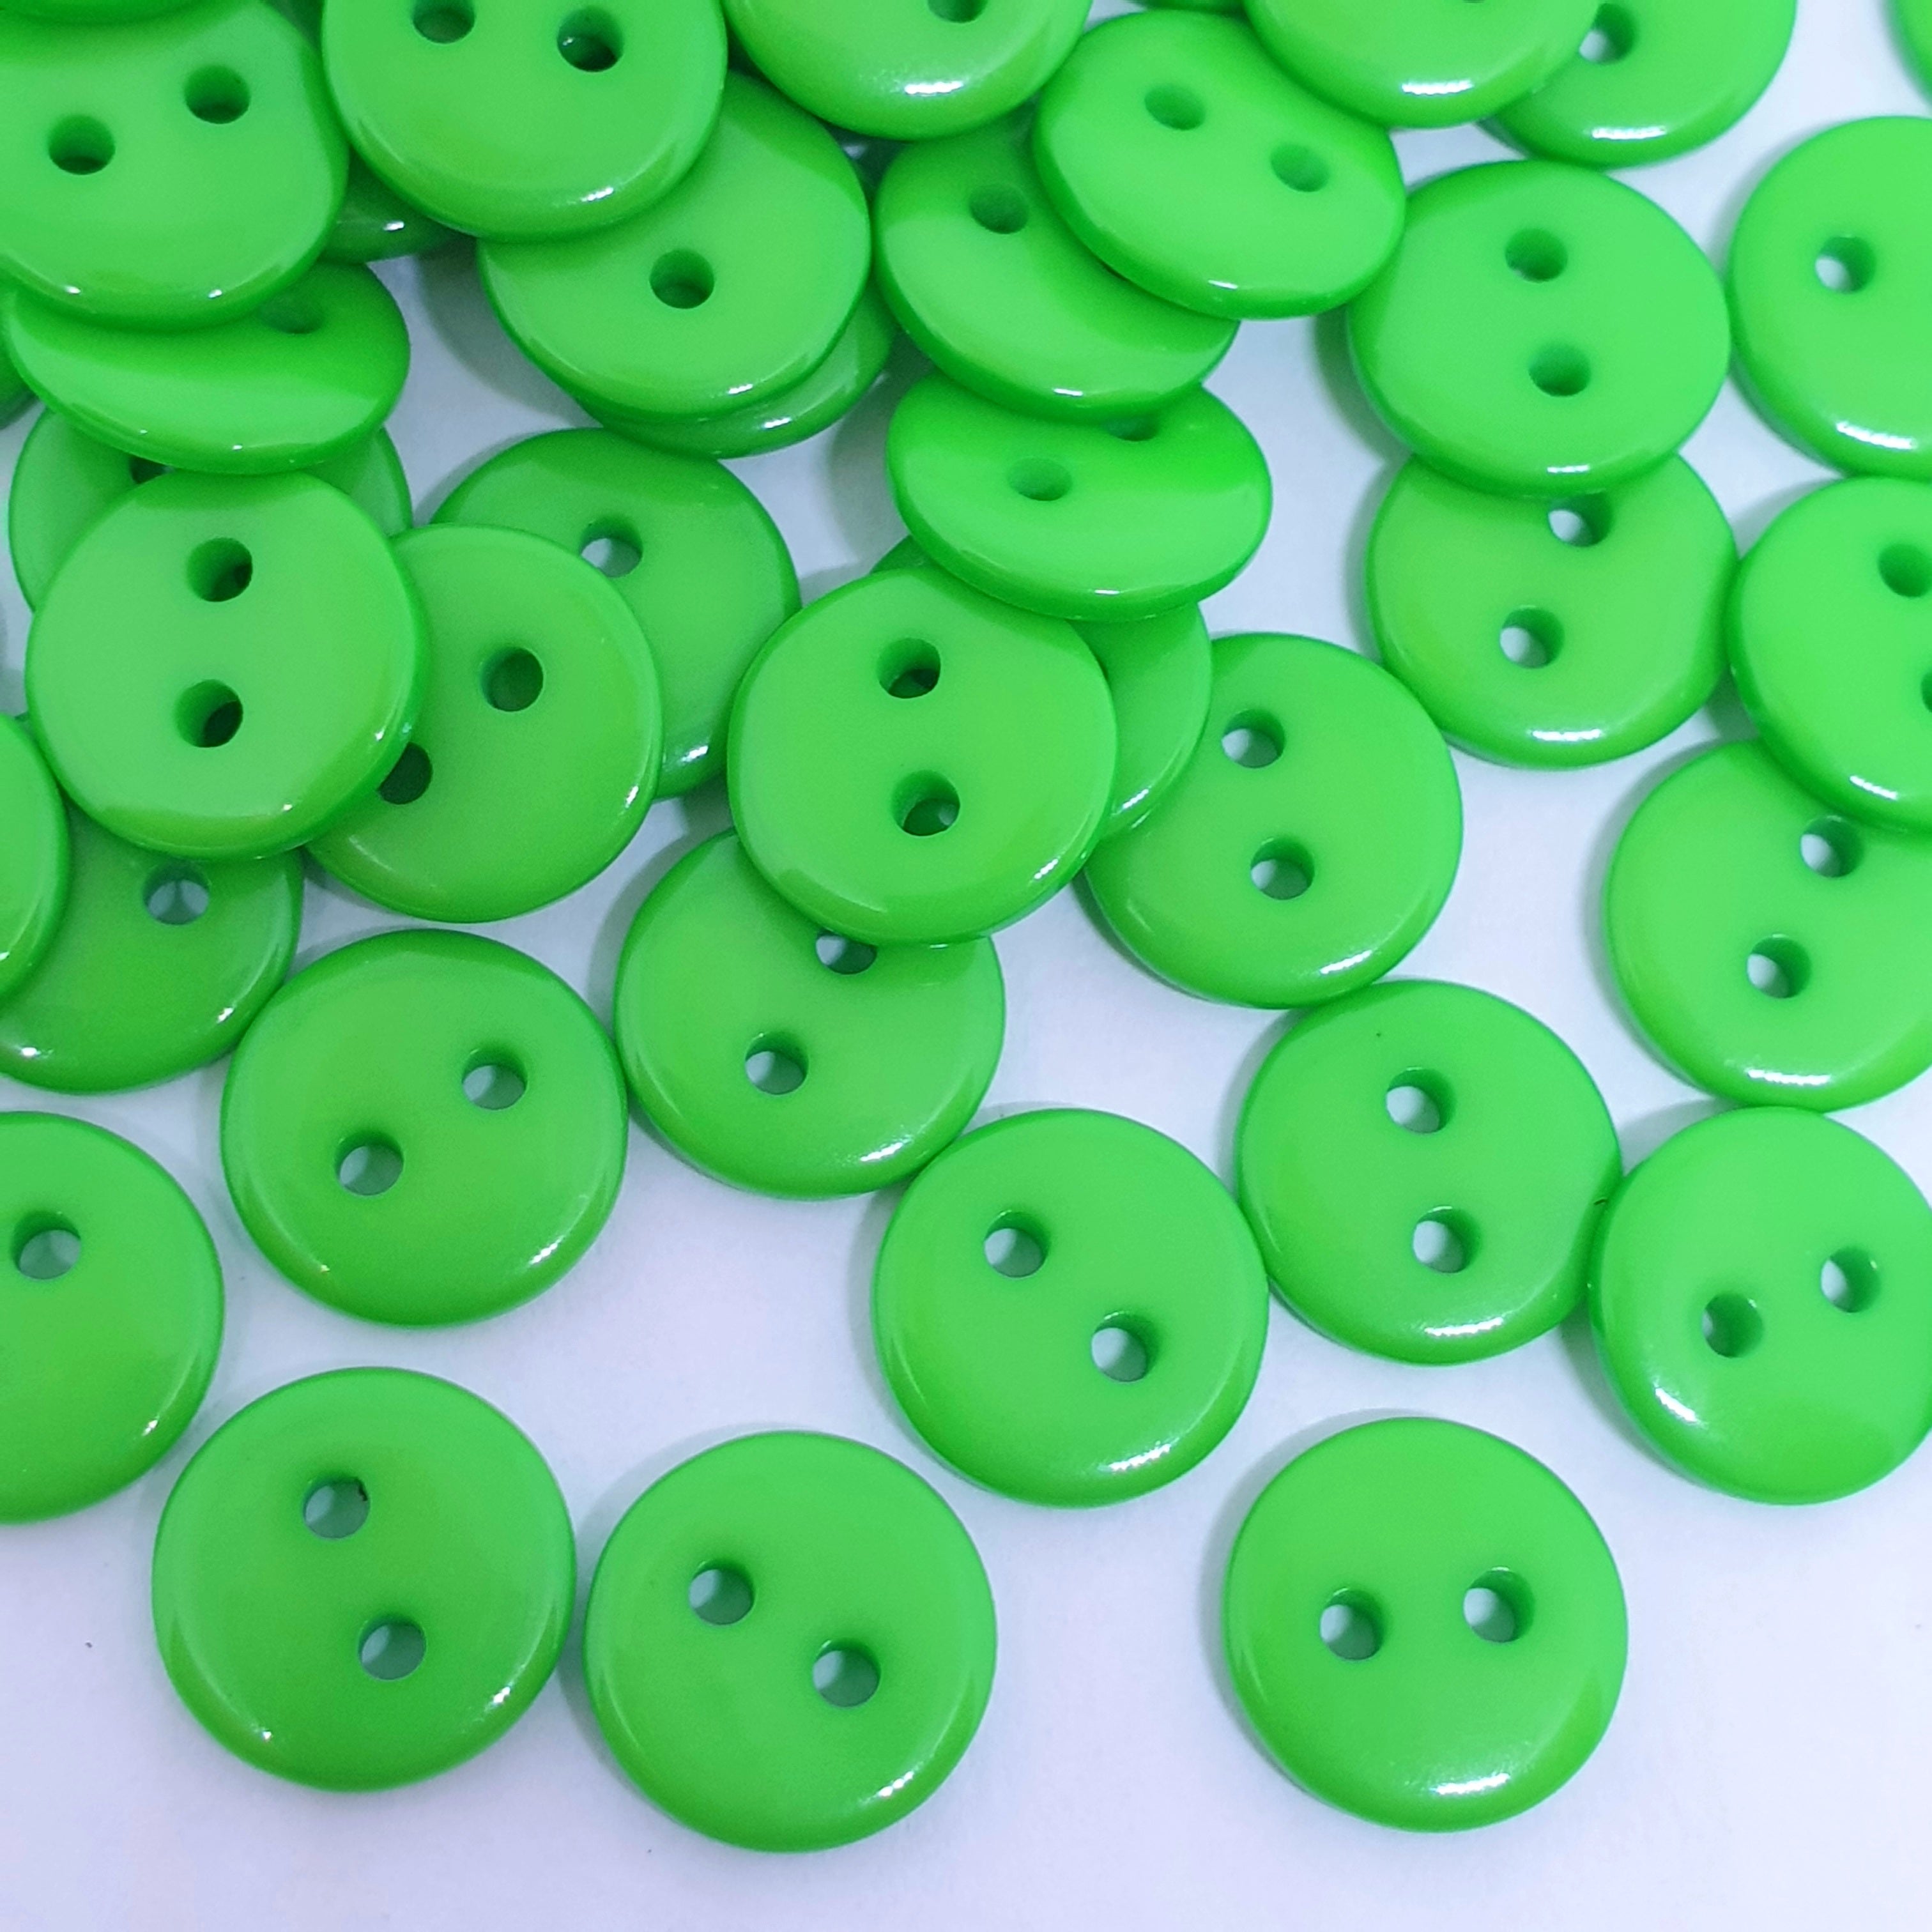 MajorCrafts 120pcs 10mm Bright Green 2 Holes Small Round Resin Sewing Buttons B16